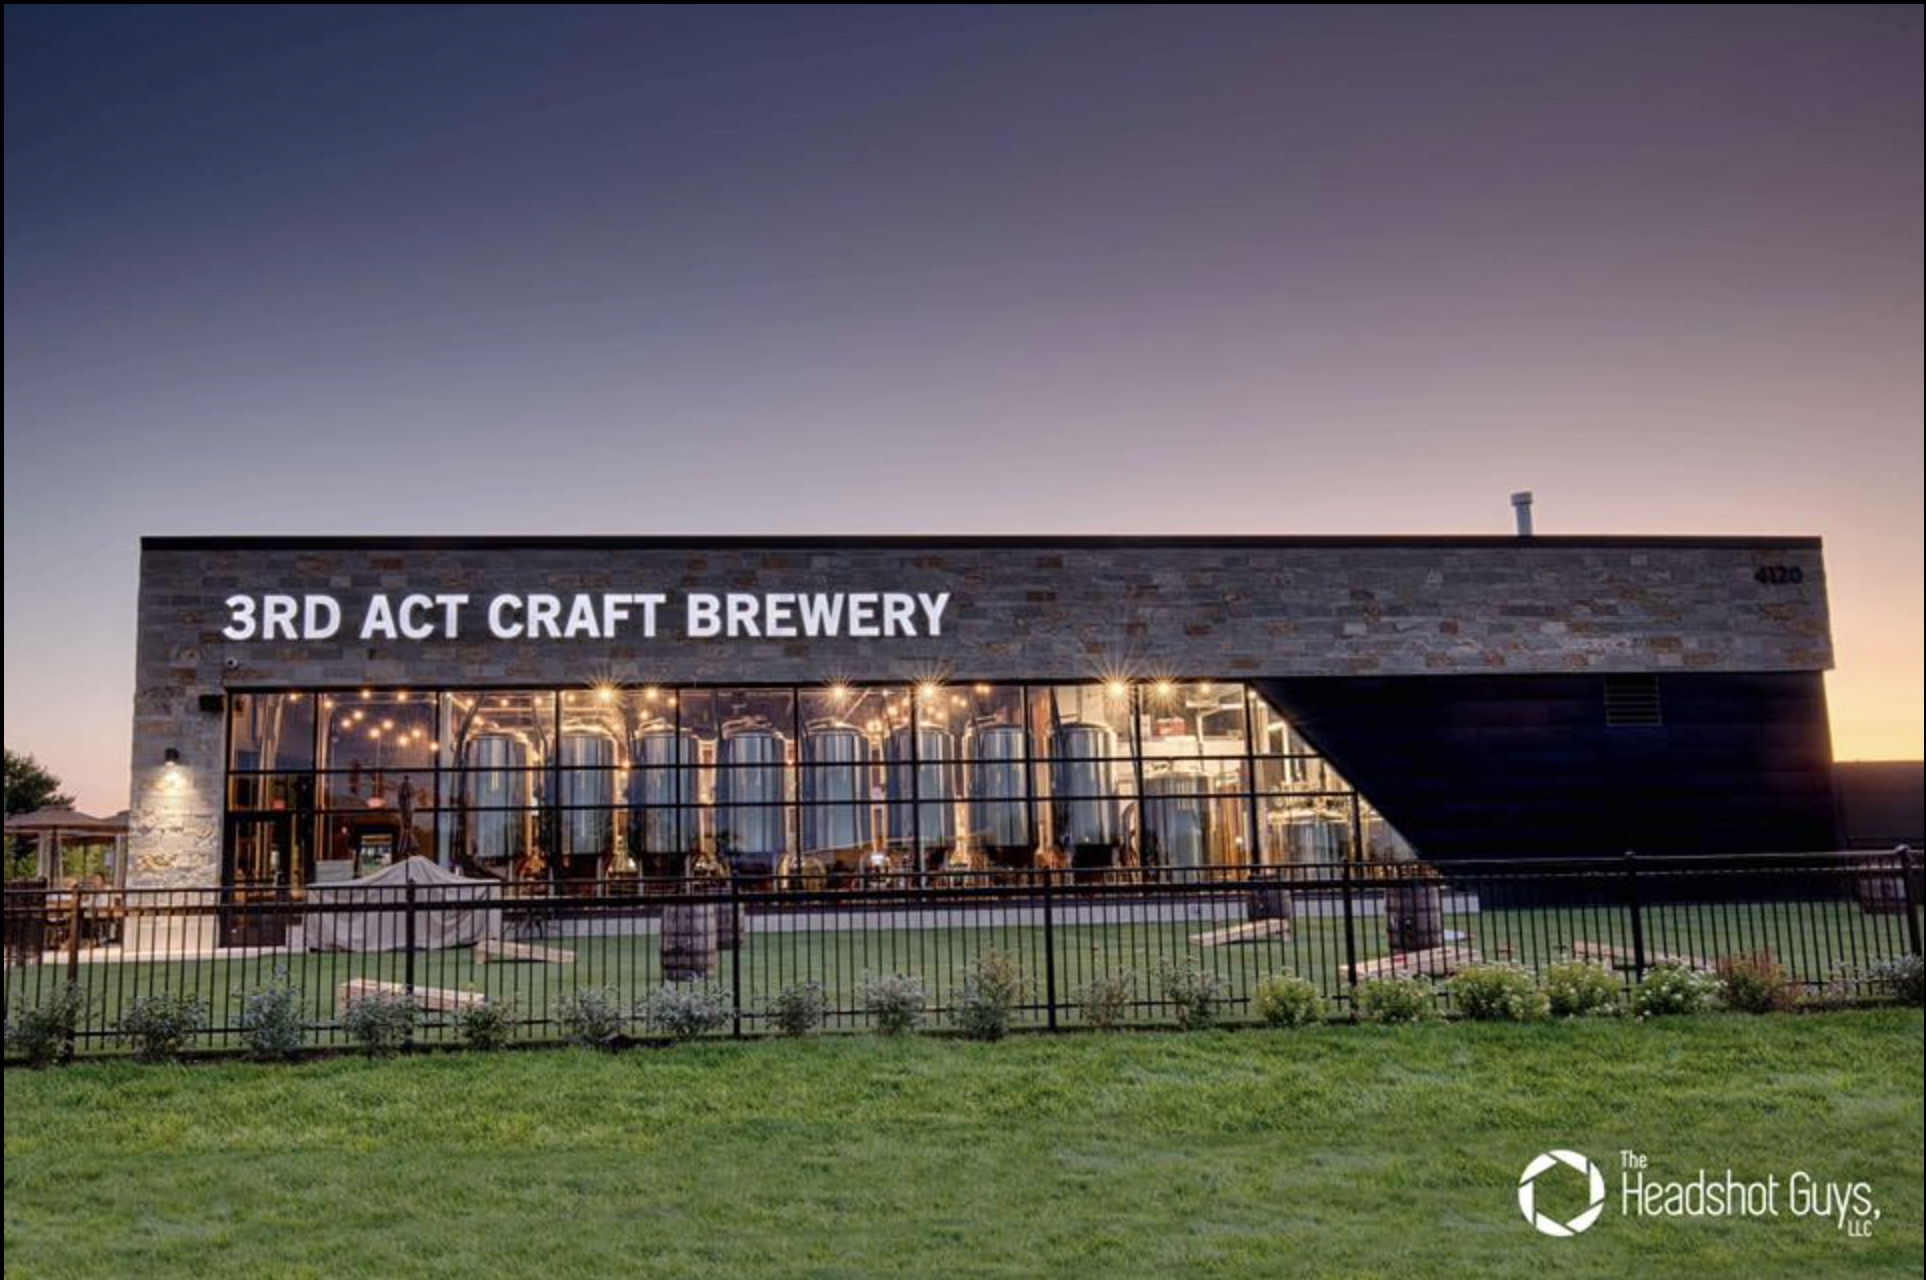 Front and outdoor lawn area at Third Act Craft Brewery.